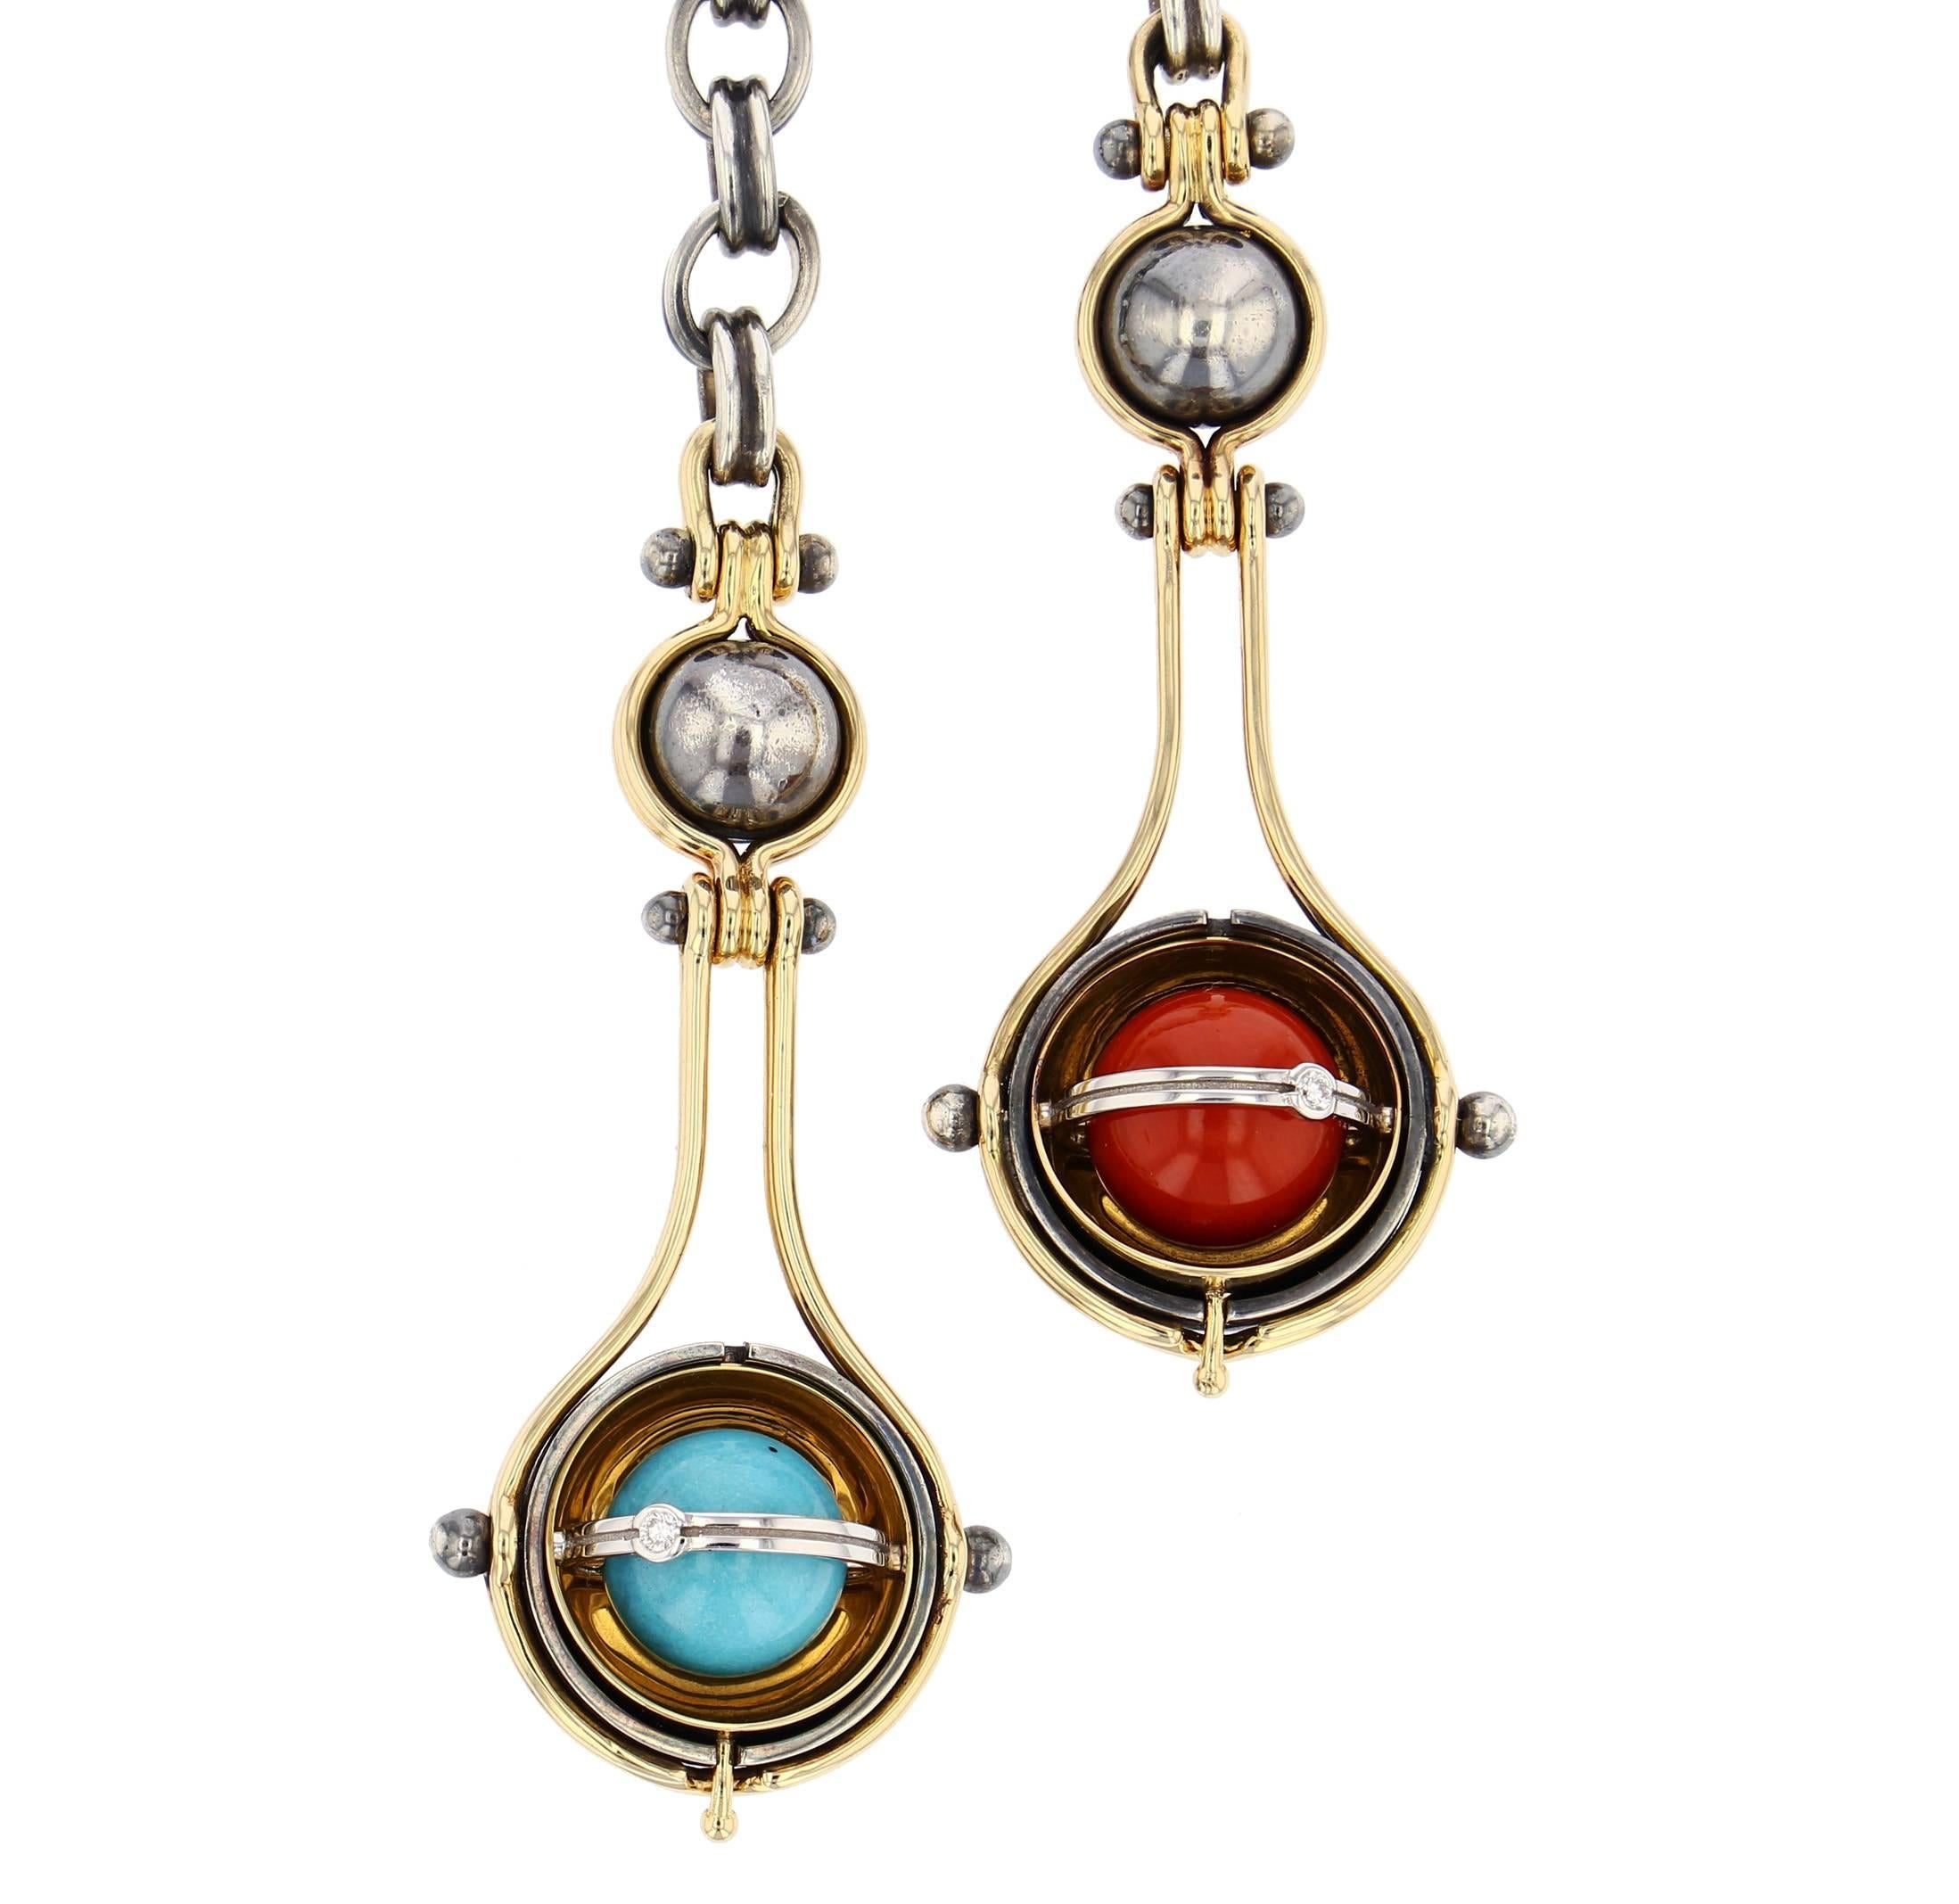 Elie Top Mecanique Celeste 2 Drops Necklace, Gold, Coral, Turquoise, Diamonds

Tie necklace with a patinated silver chain. The two drops comprise two yellow gold threads around a patinated silver globe supporting a mobile structure. This in turn